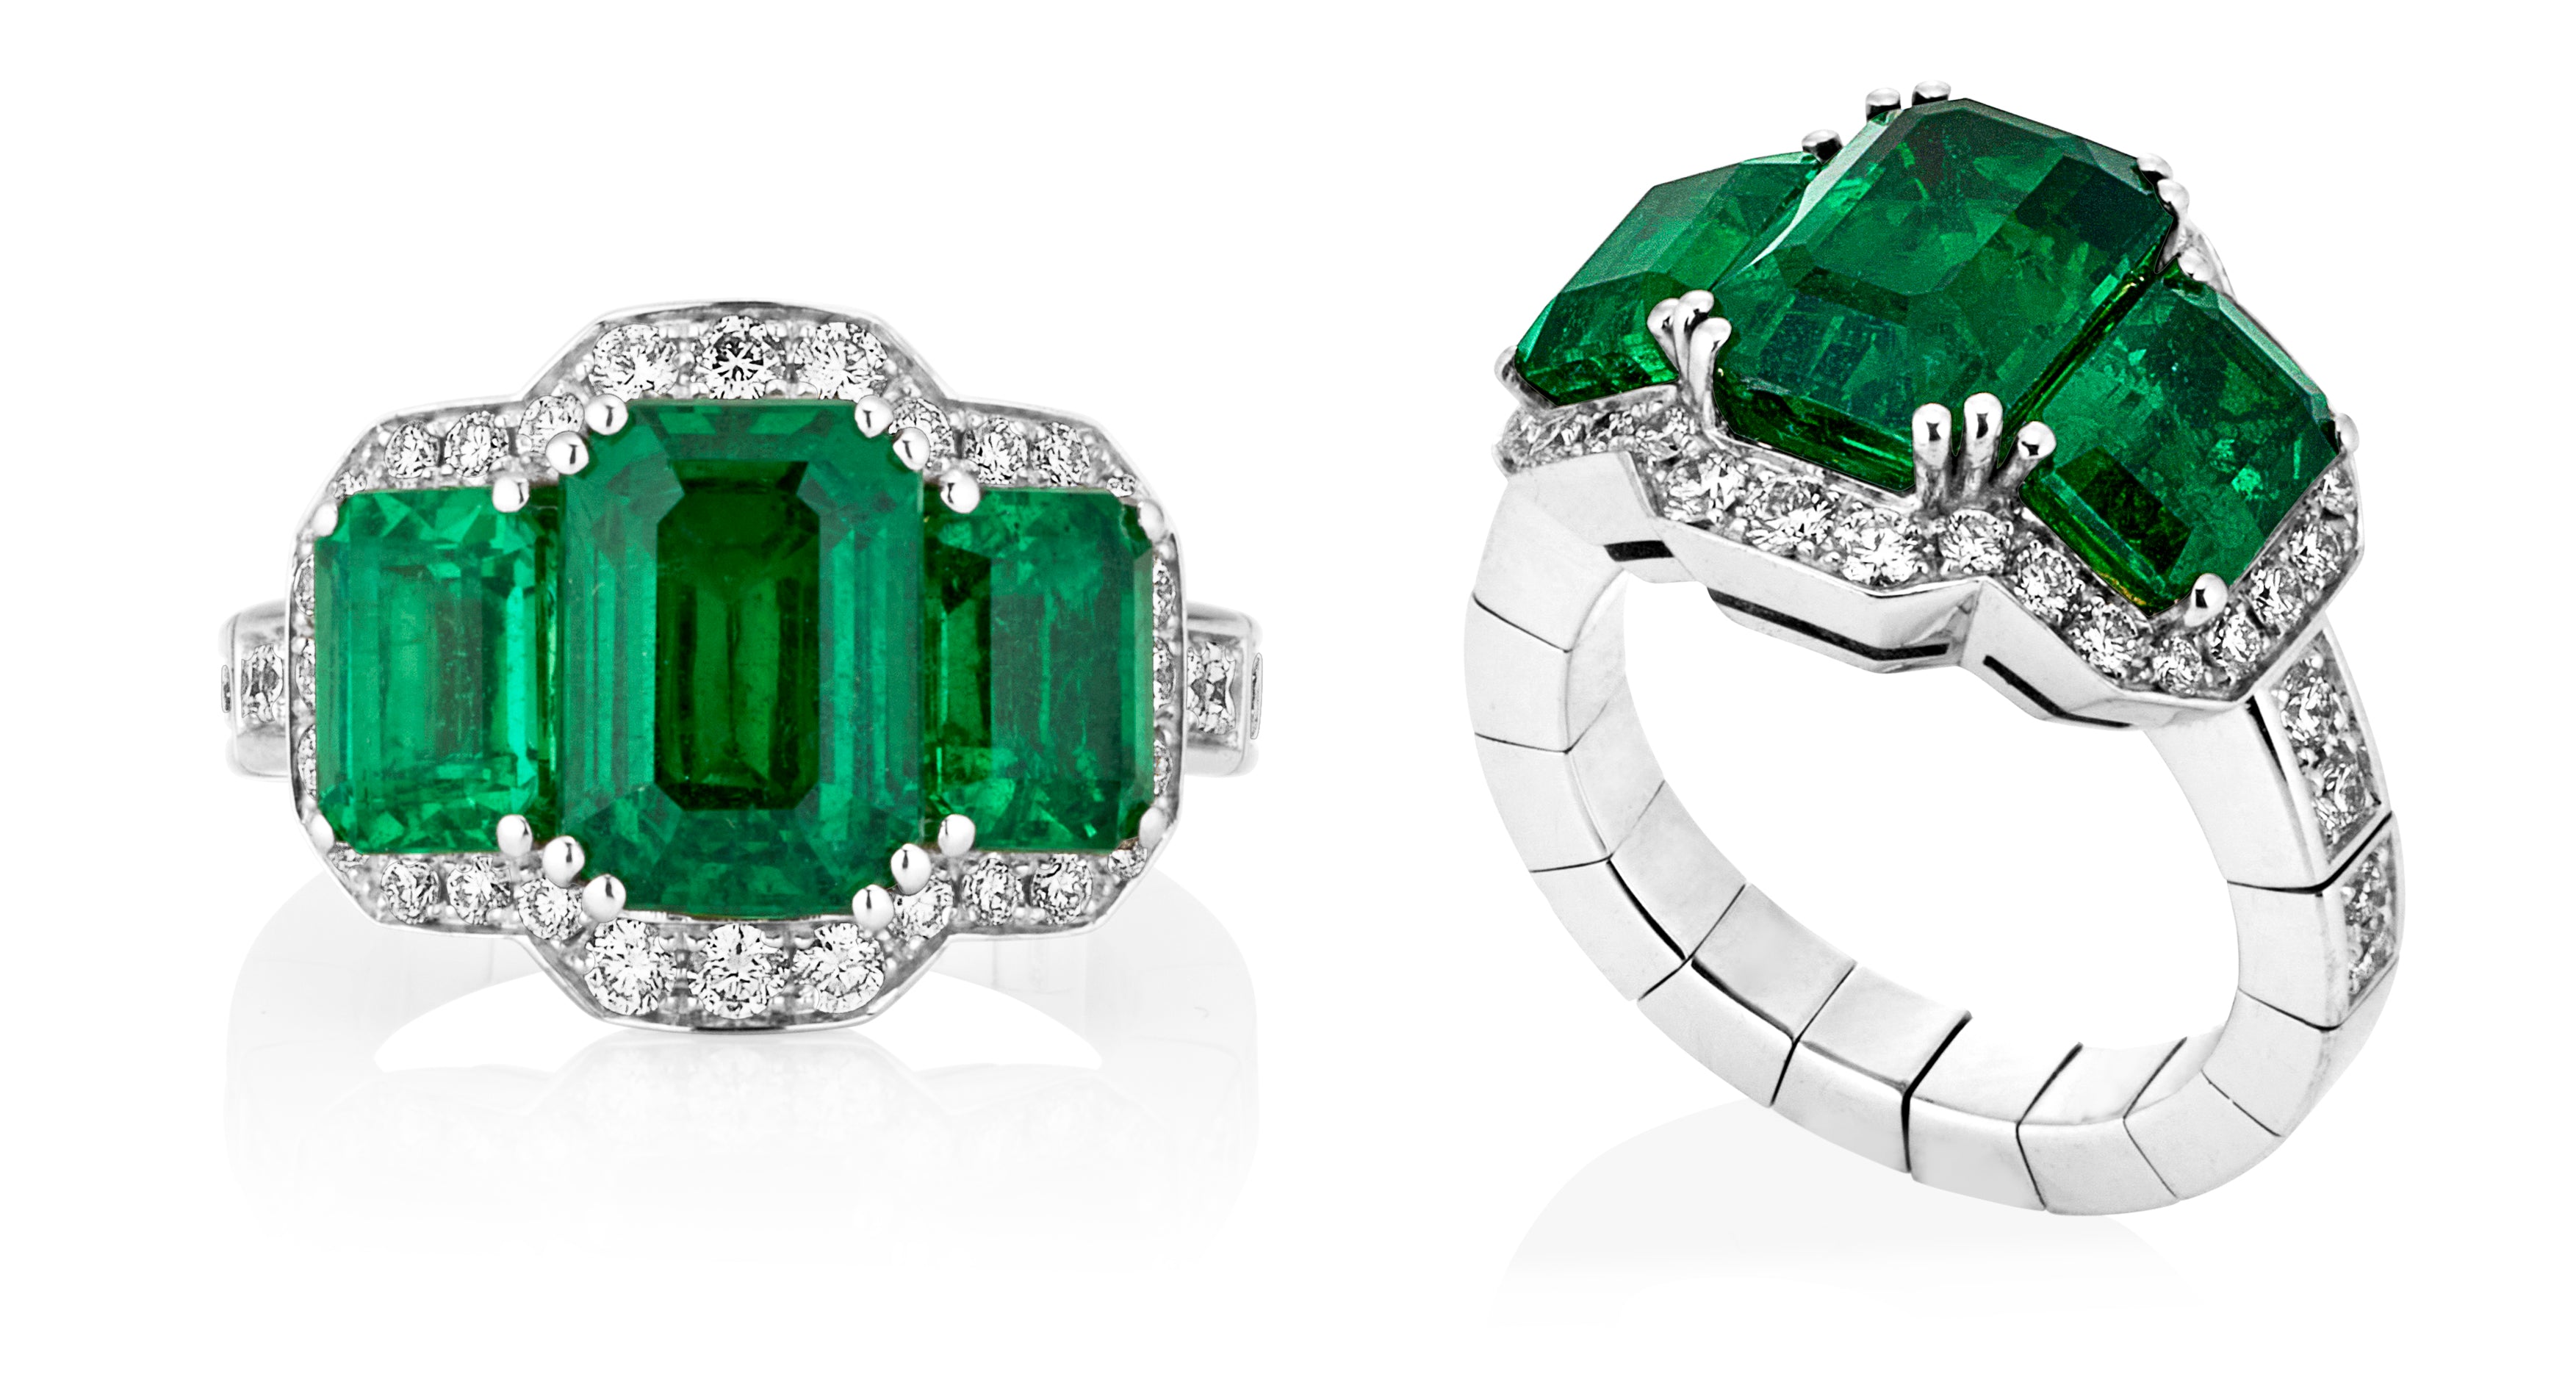 Picchiotti Emerald Ring, Front and Side